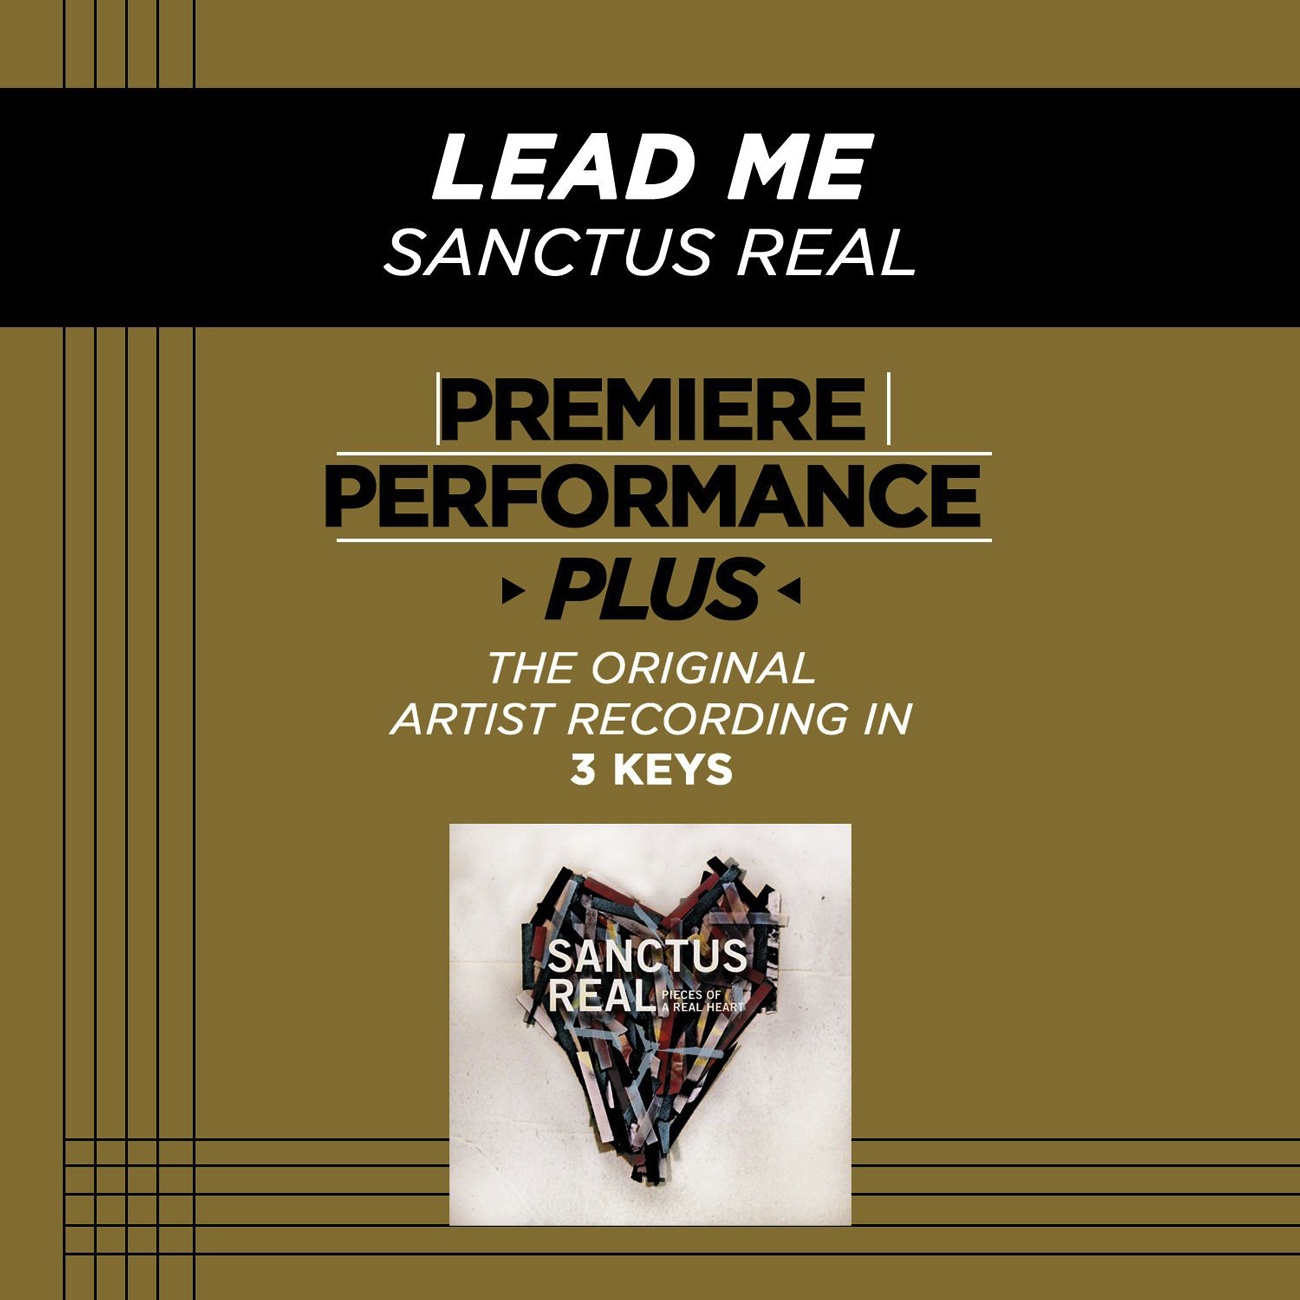 Lead Me (Medium Key Performance Track Without Background Vocals)